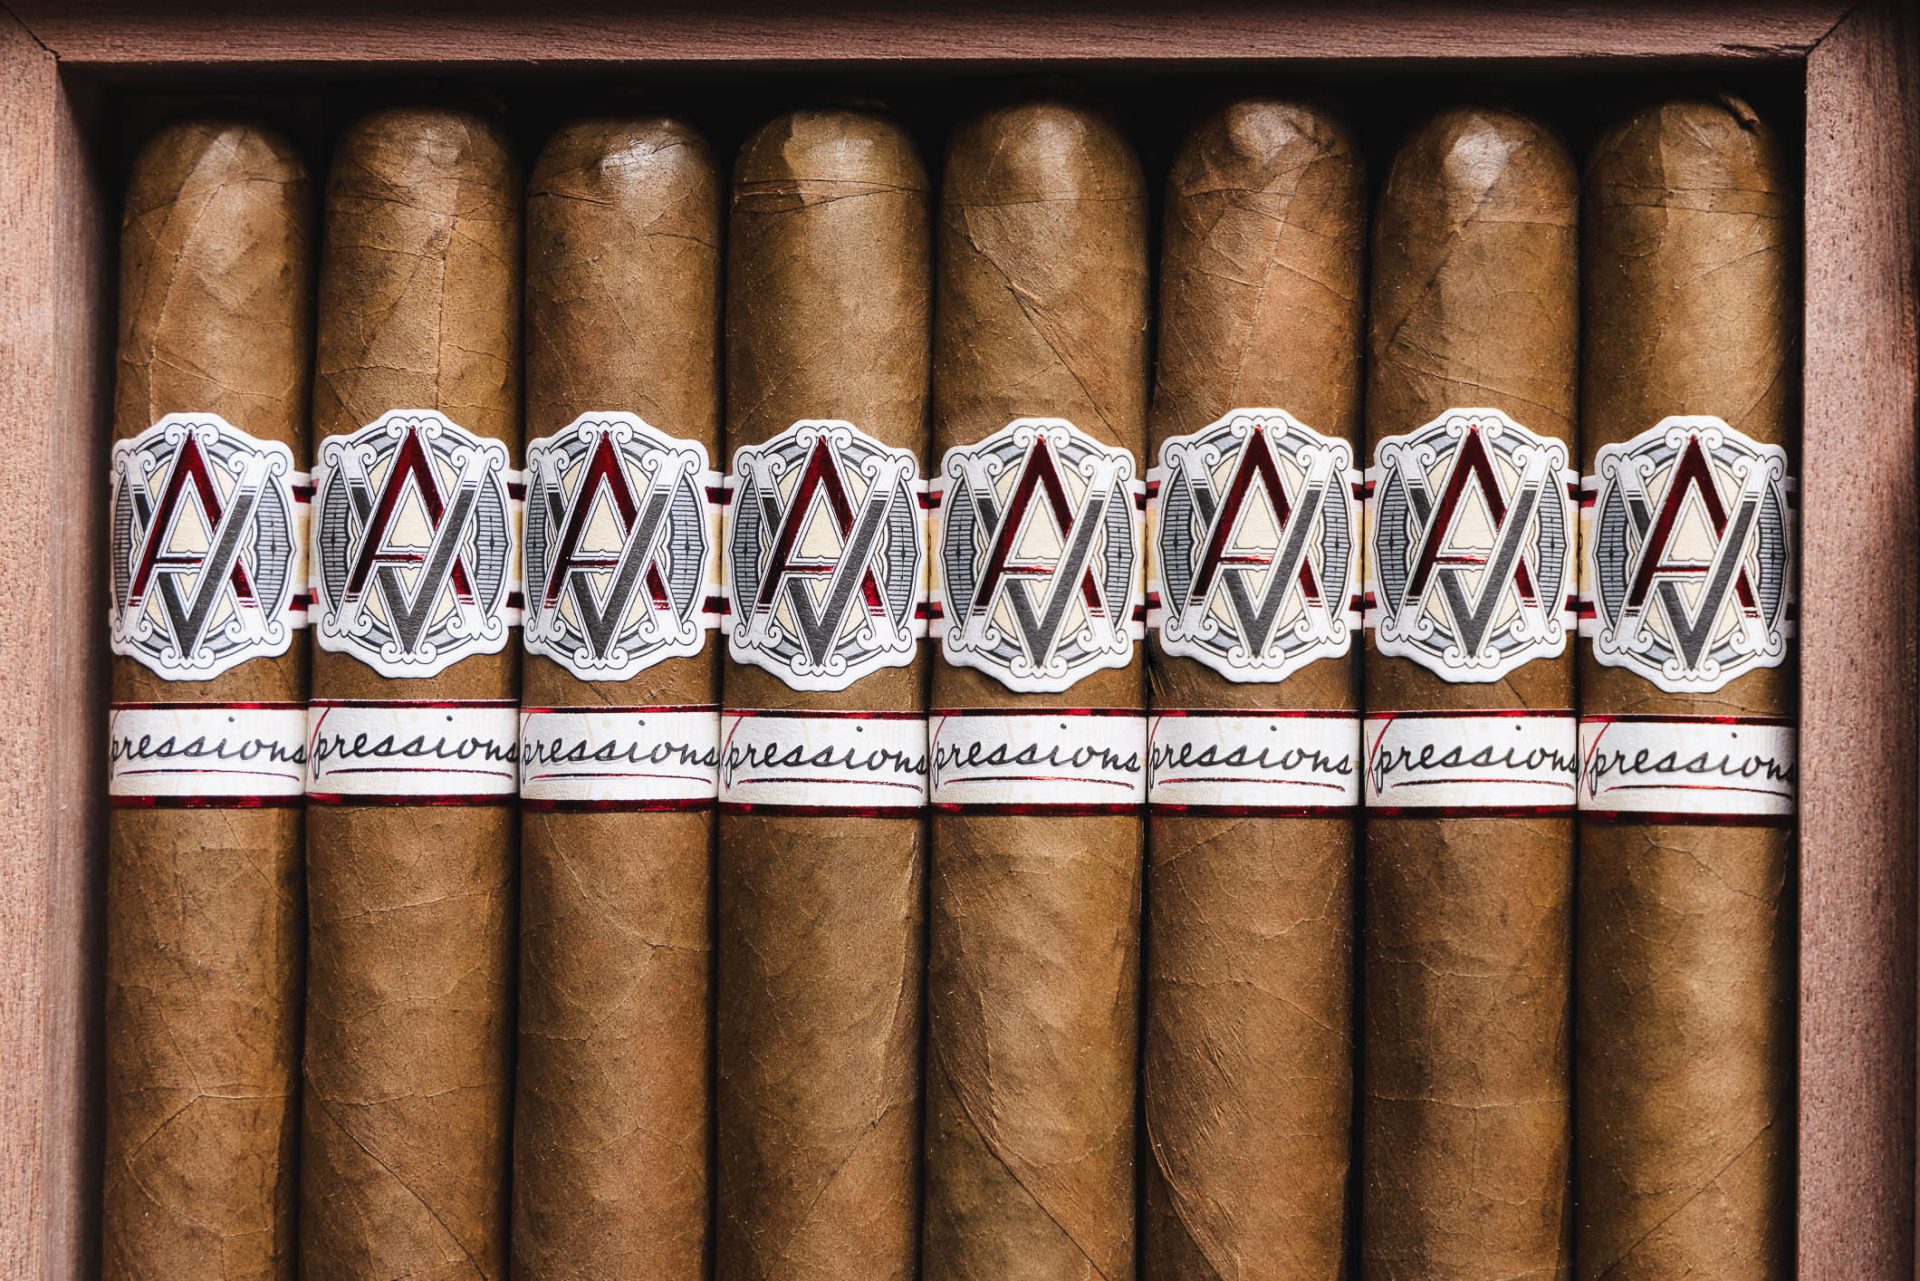 AVO CIGARS TO RELEASE THE HIGHLY ANTICIPATED LIMITED EDITION AVO EXPRESSIONS 2024: A COLLABORATION WITH WORLD-RENOWNED DJ D-NICE